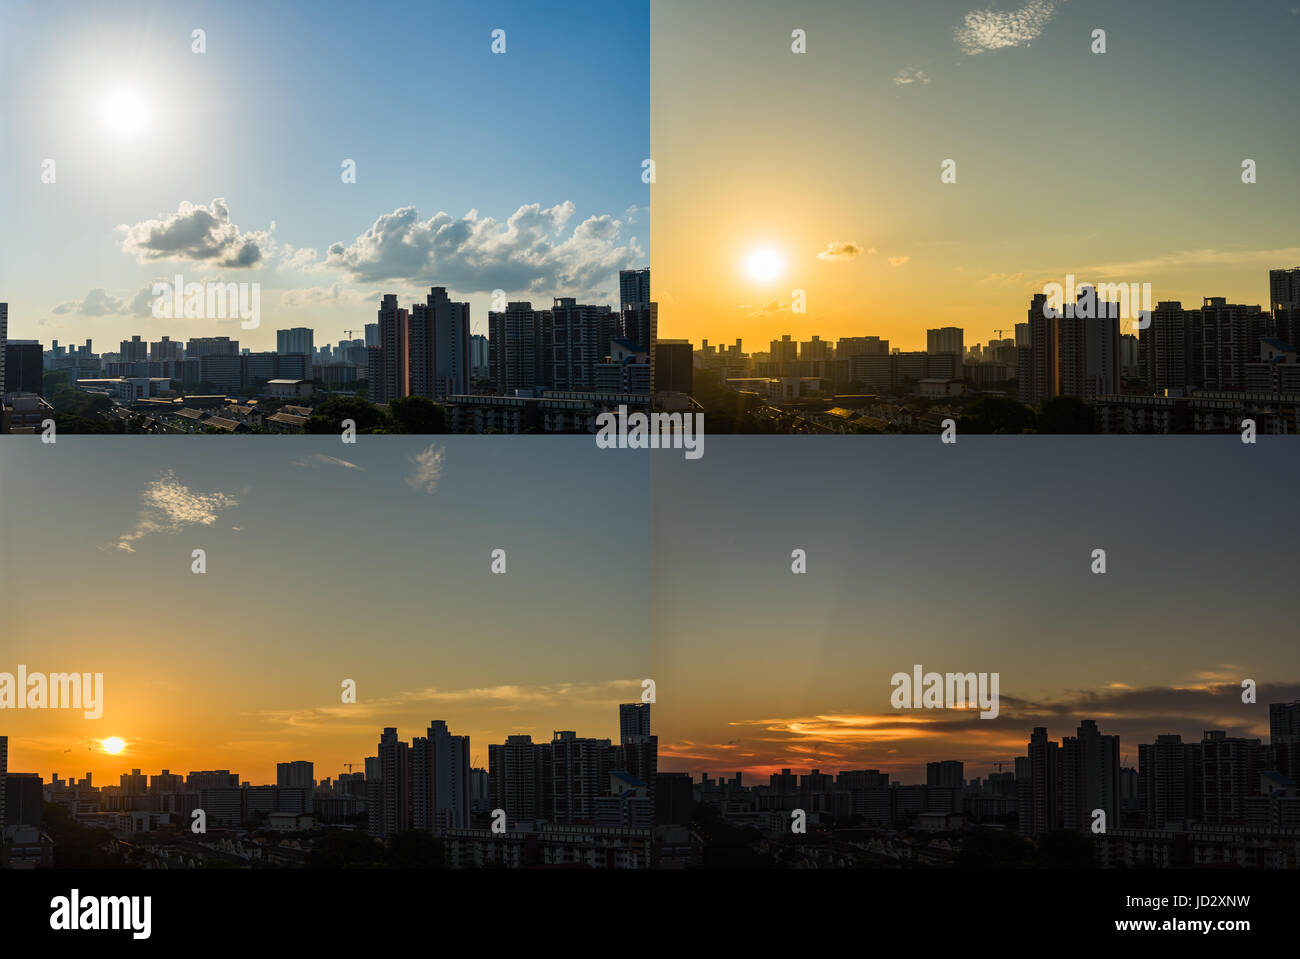 4 Moments of Sunset, view of the Downtown Singapore skyline from day to night with clouds, Singapore Asia Stock Photo